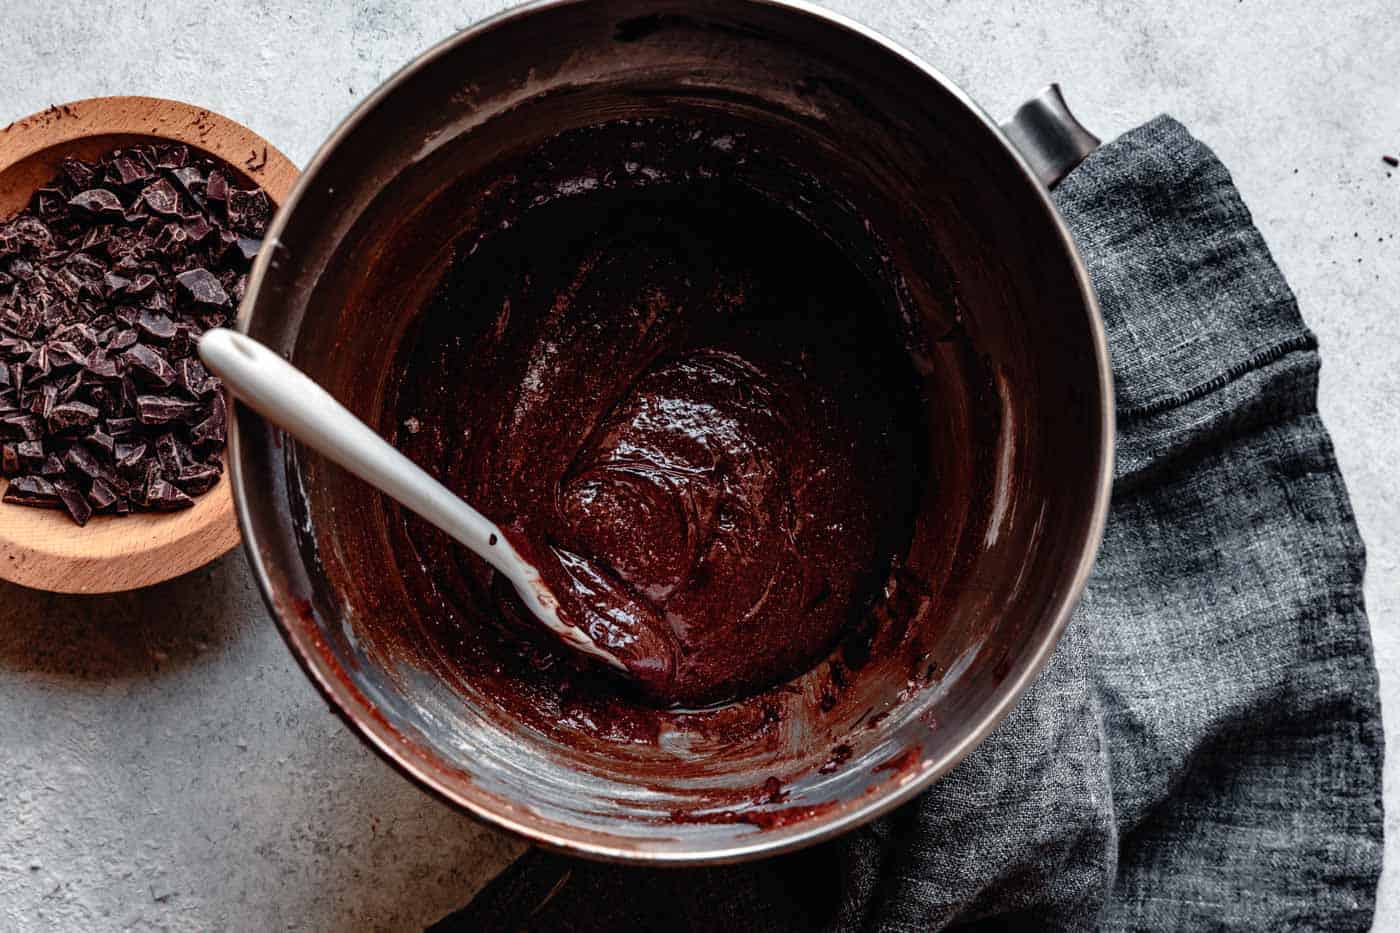 chocolate cookie batter